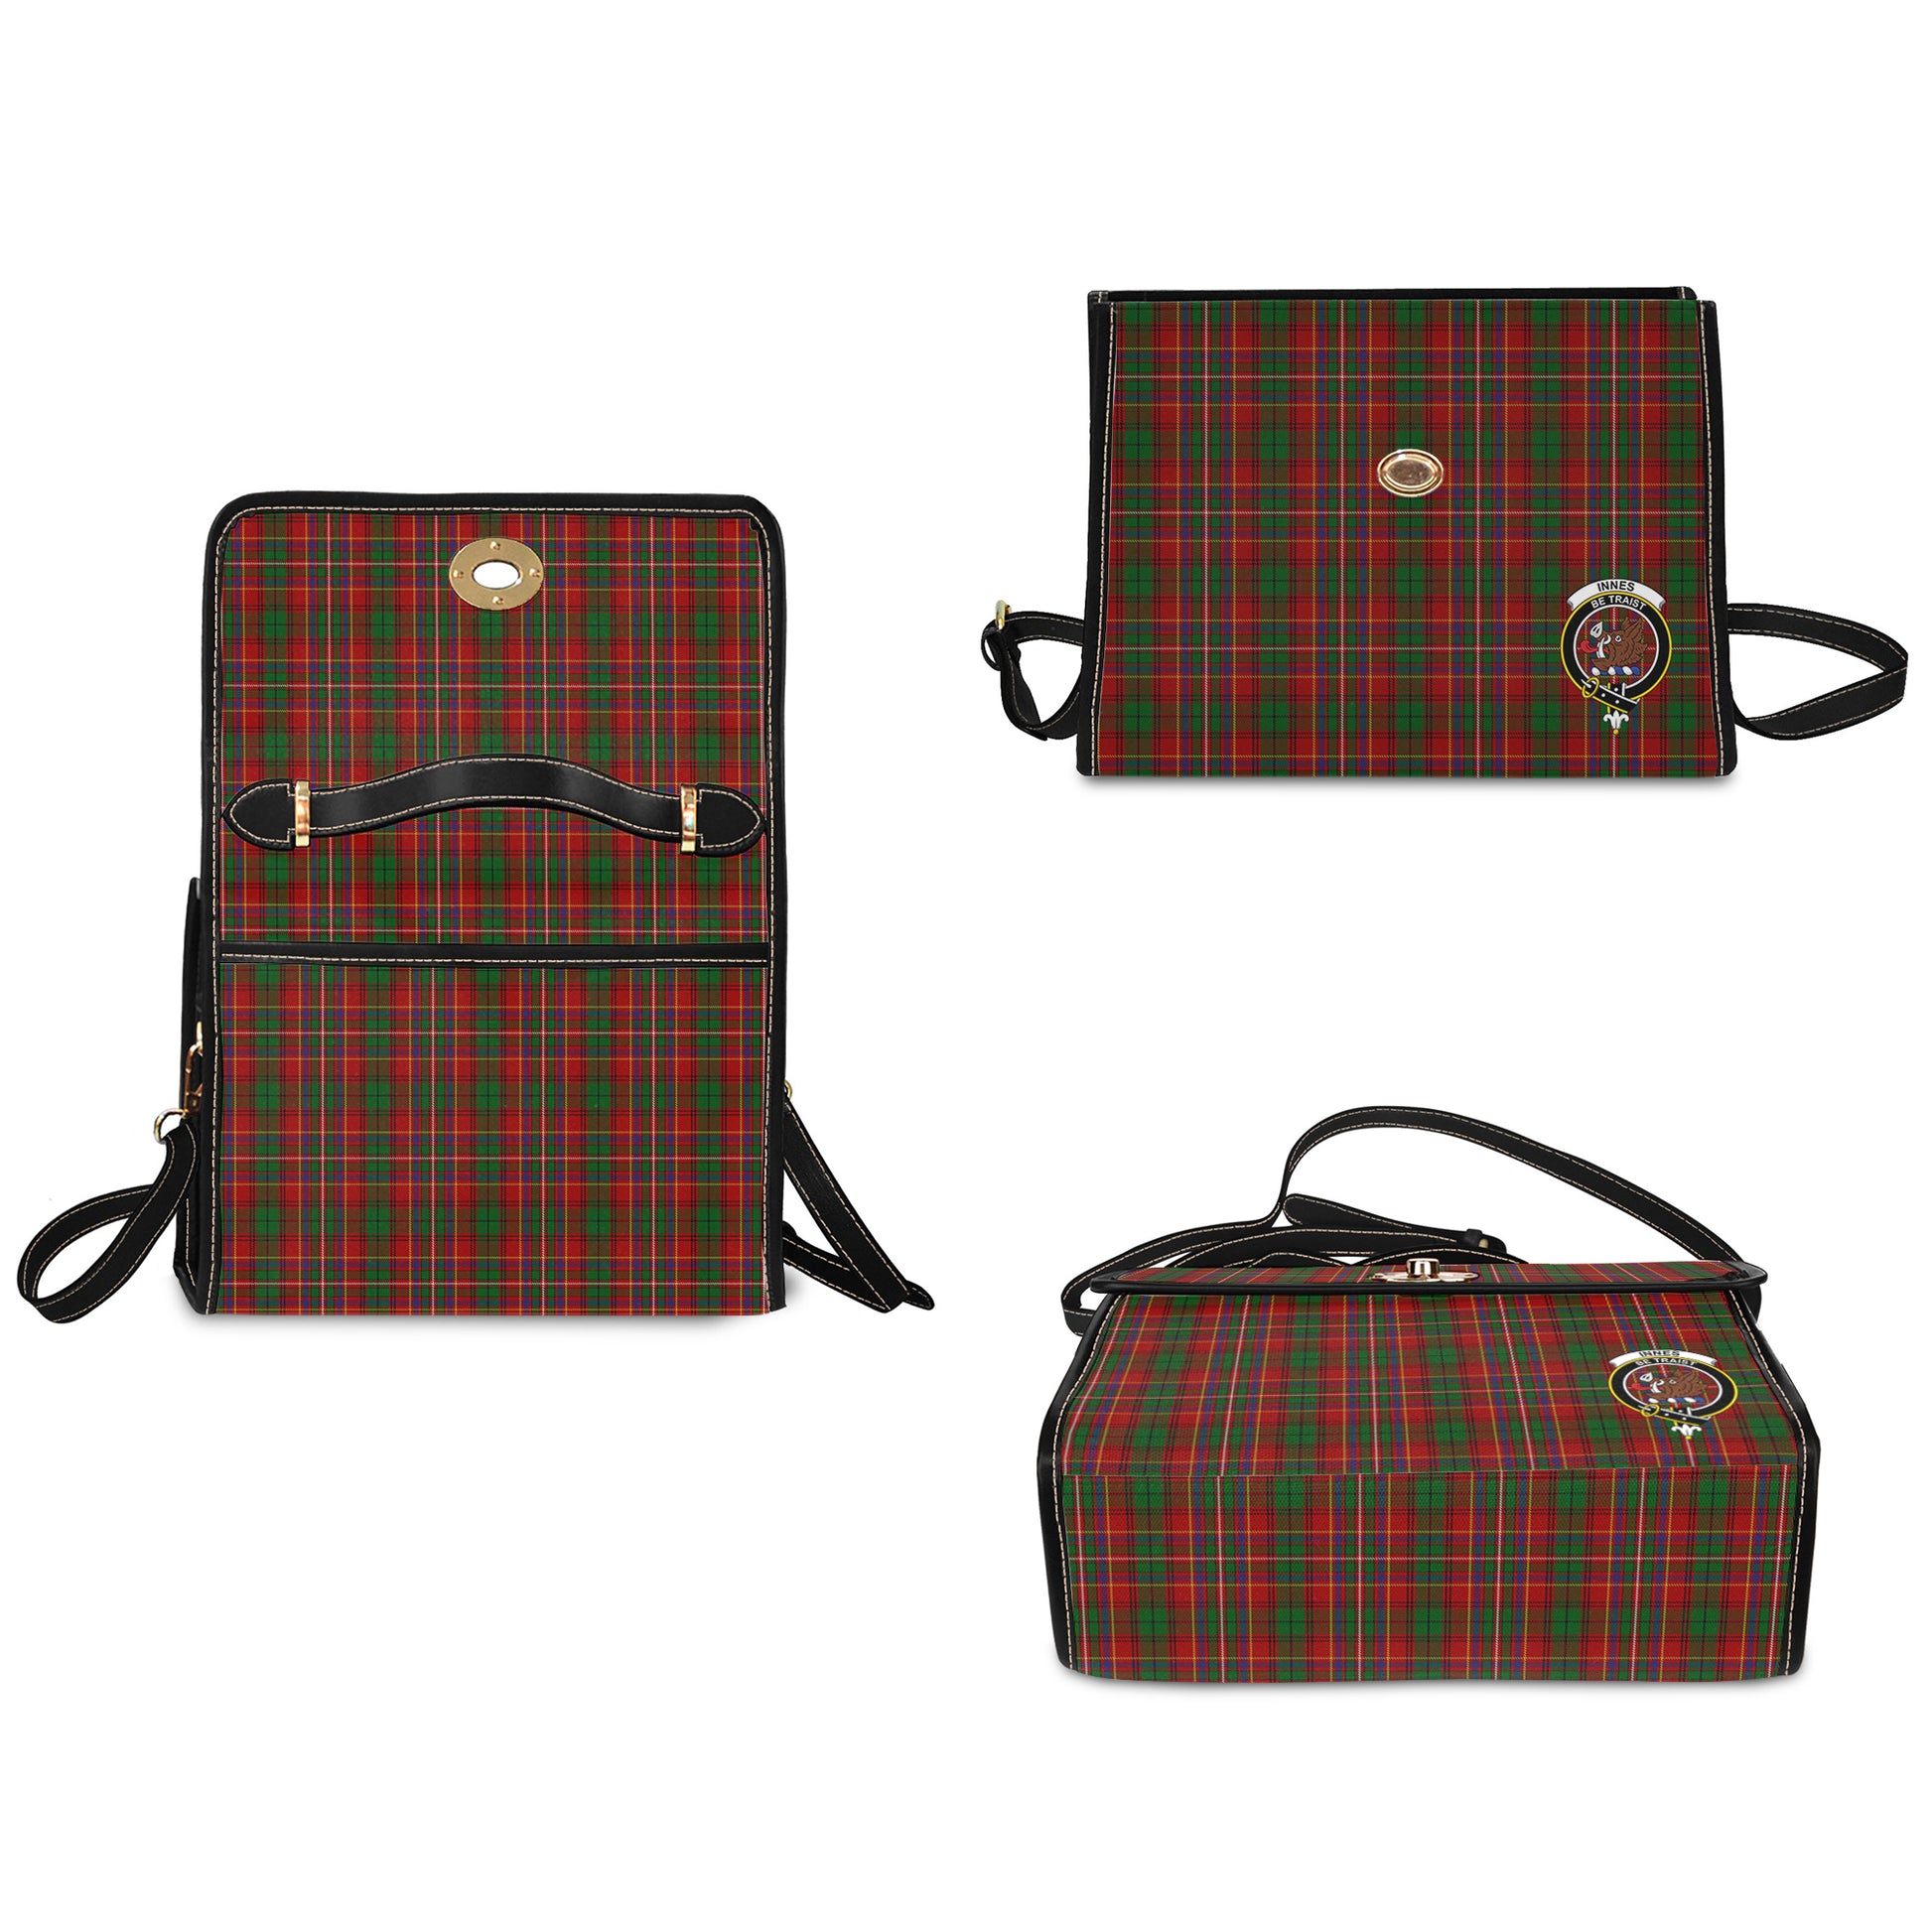 innes-tartan-leather-strap-waterproof-canvas-bag-with-family-crest